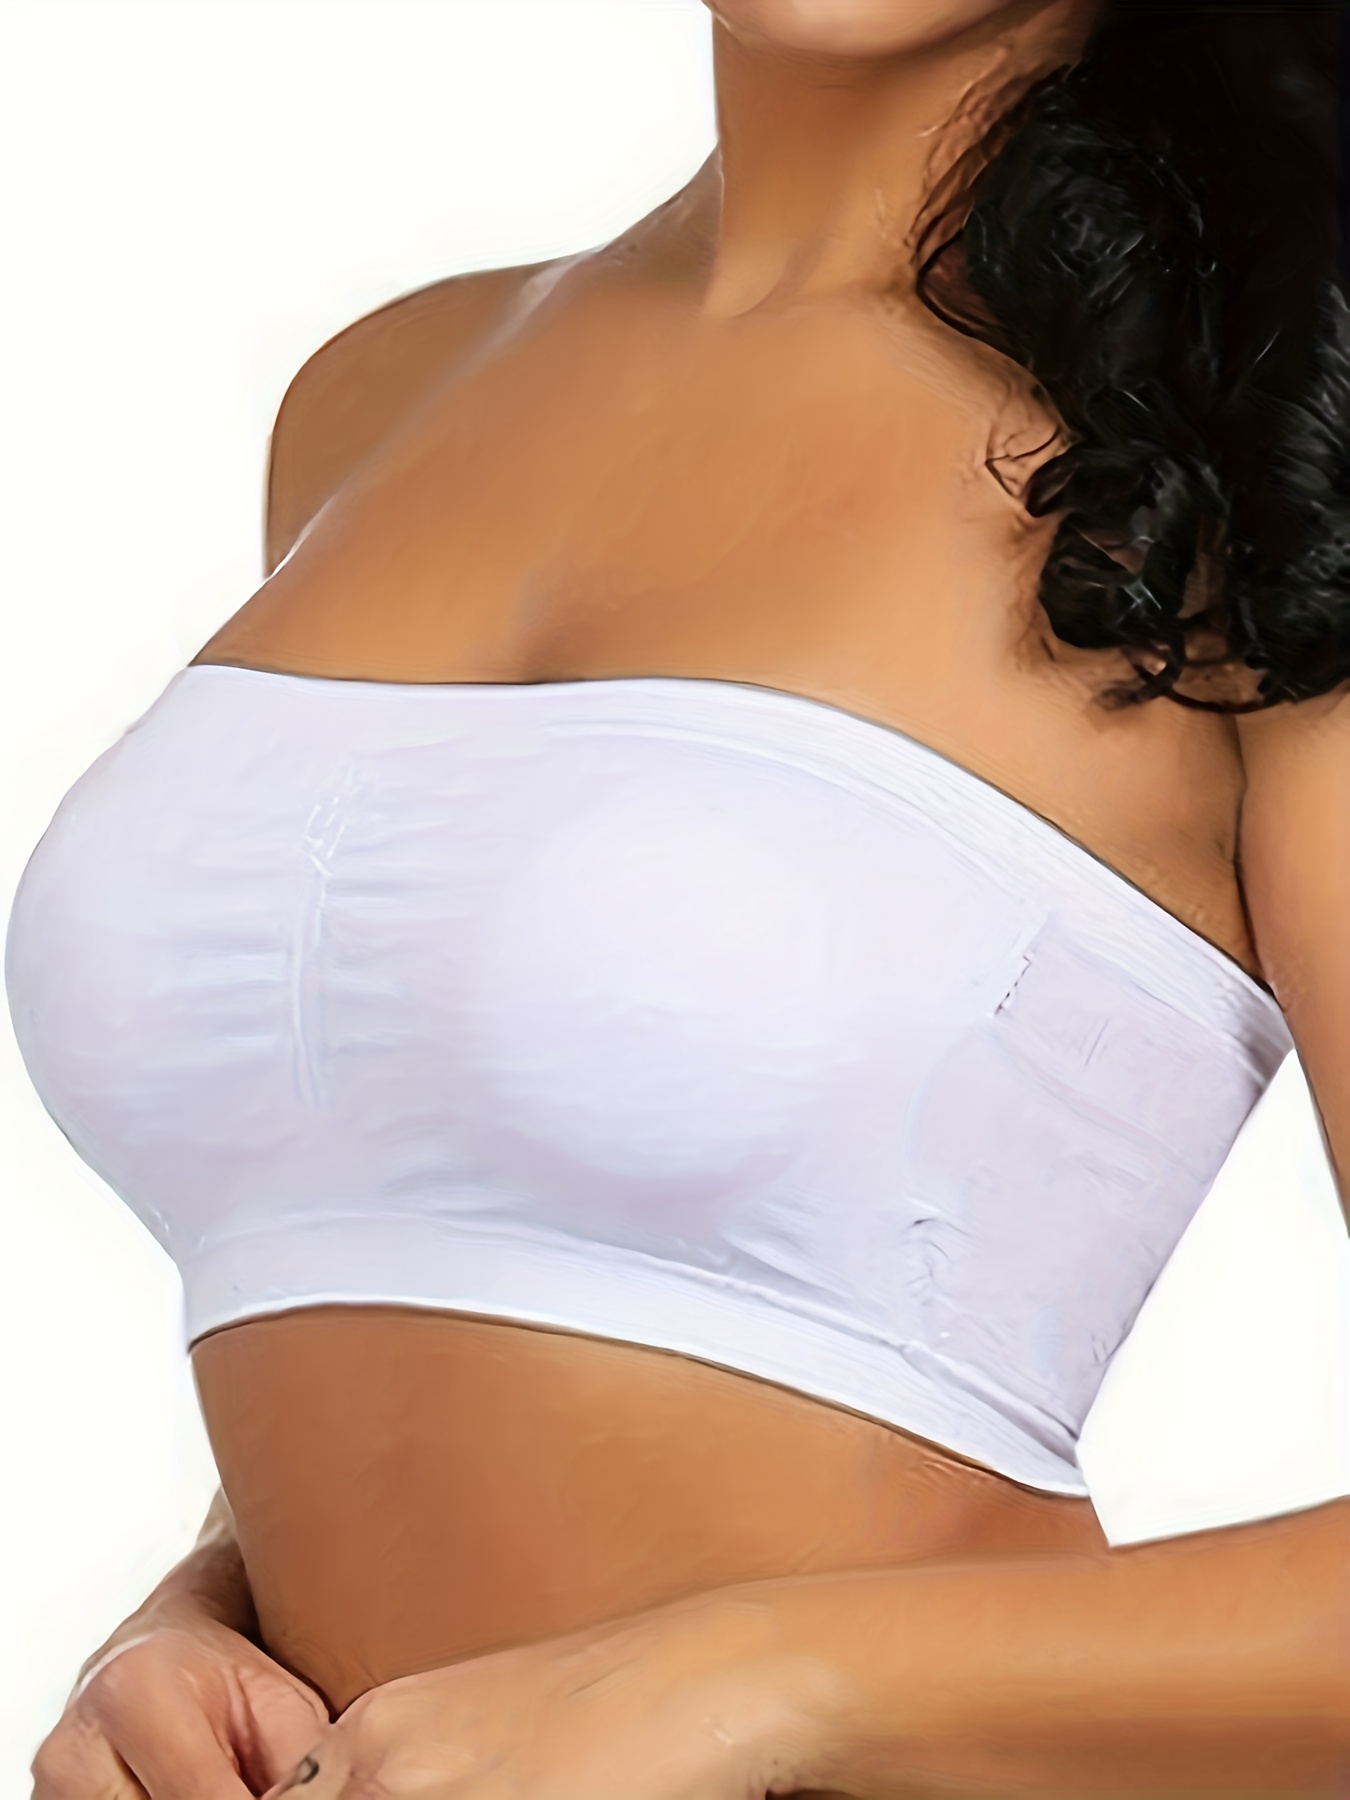 Plus Size Strapless Bra with pads for Women Padded Tube Bandeau